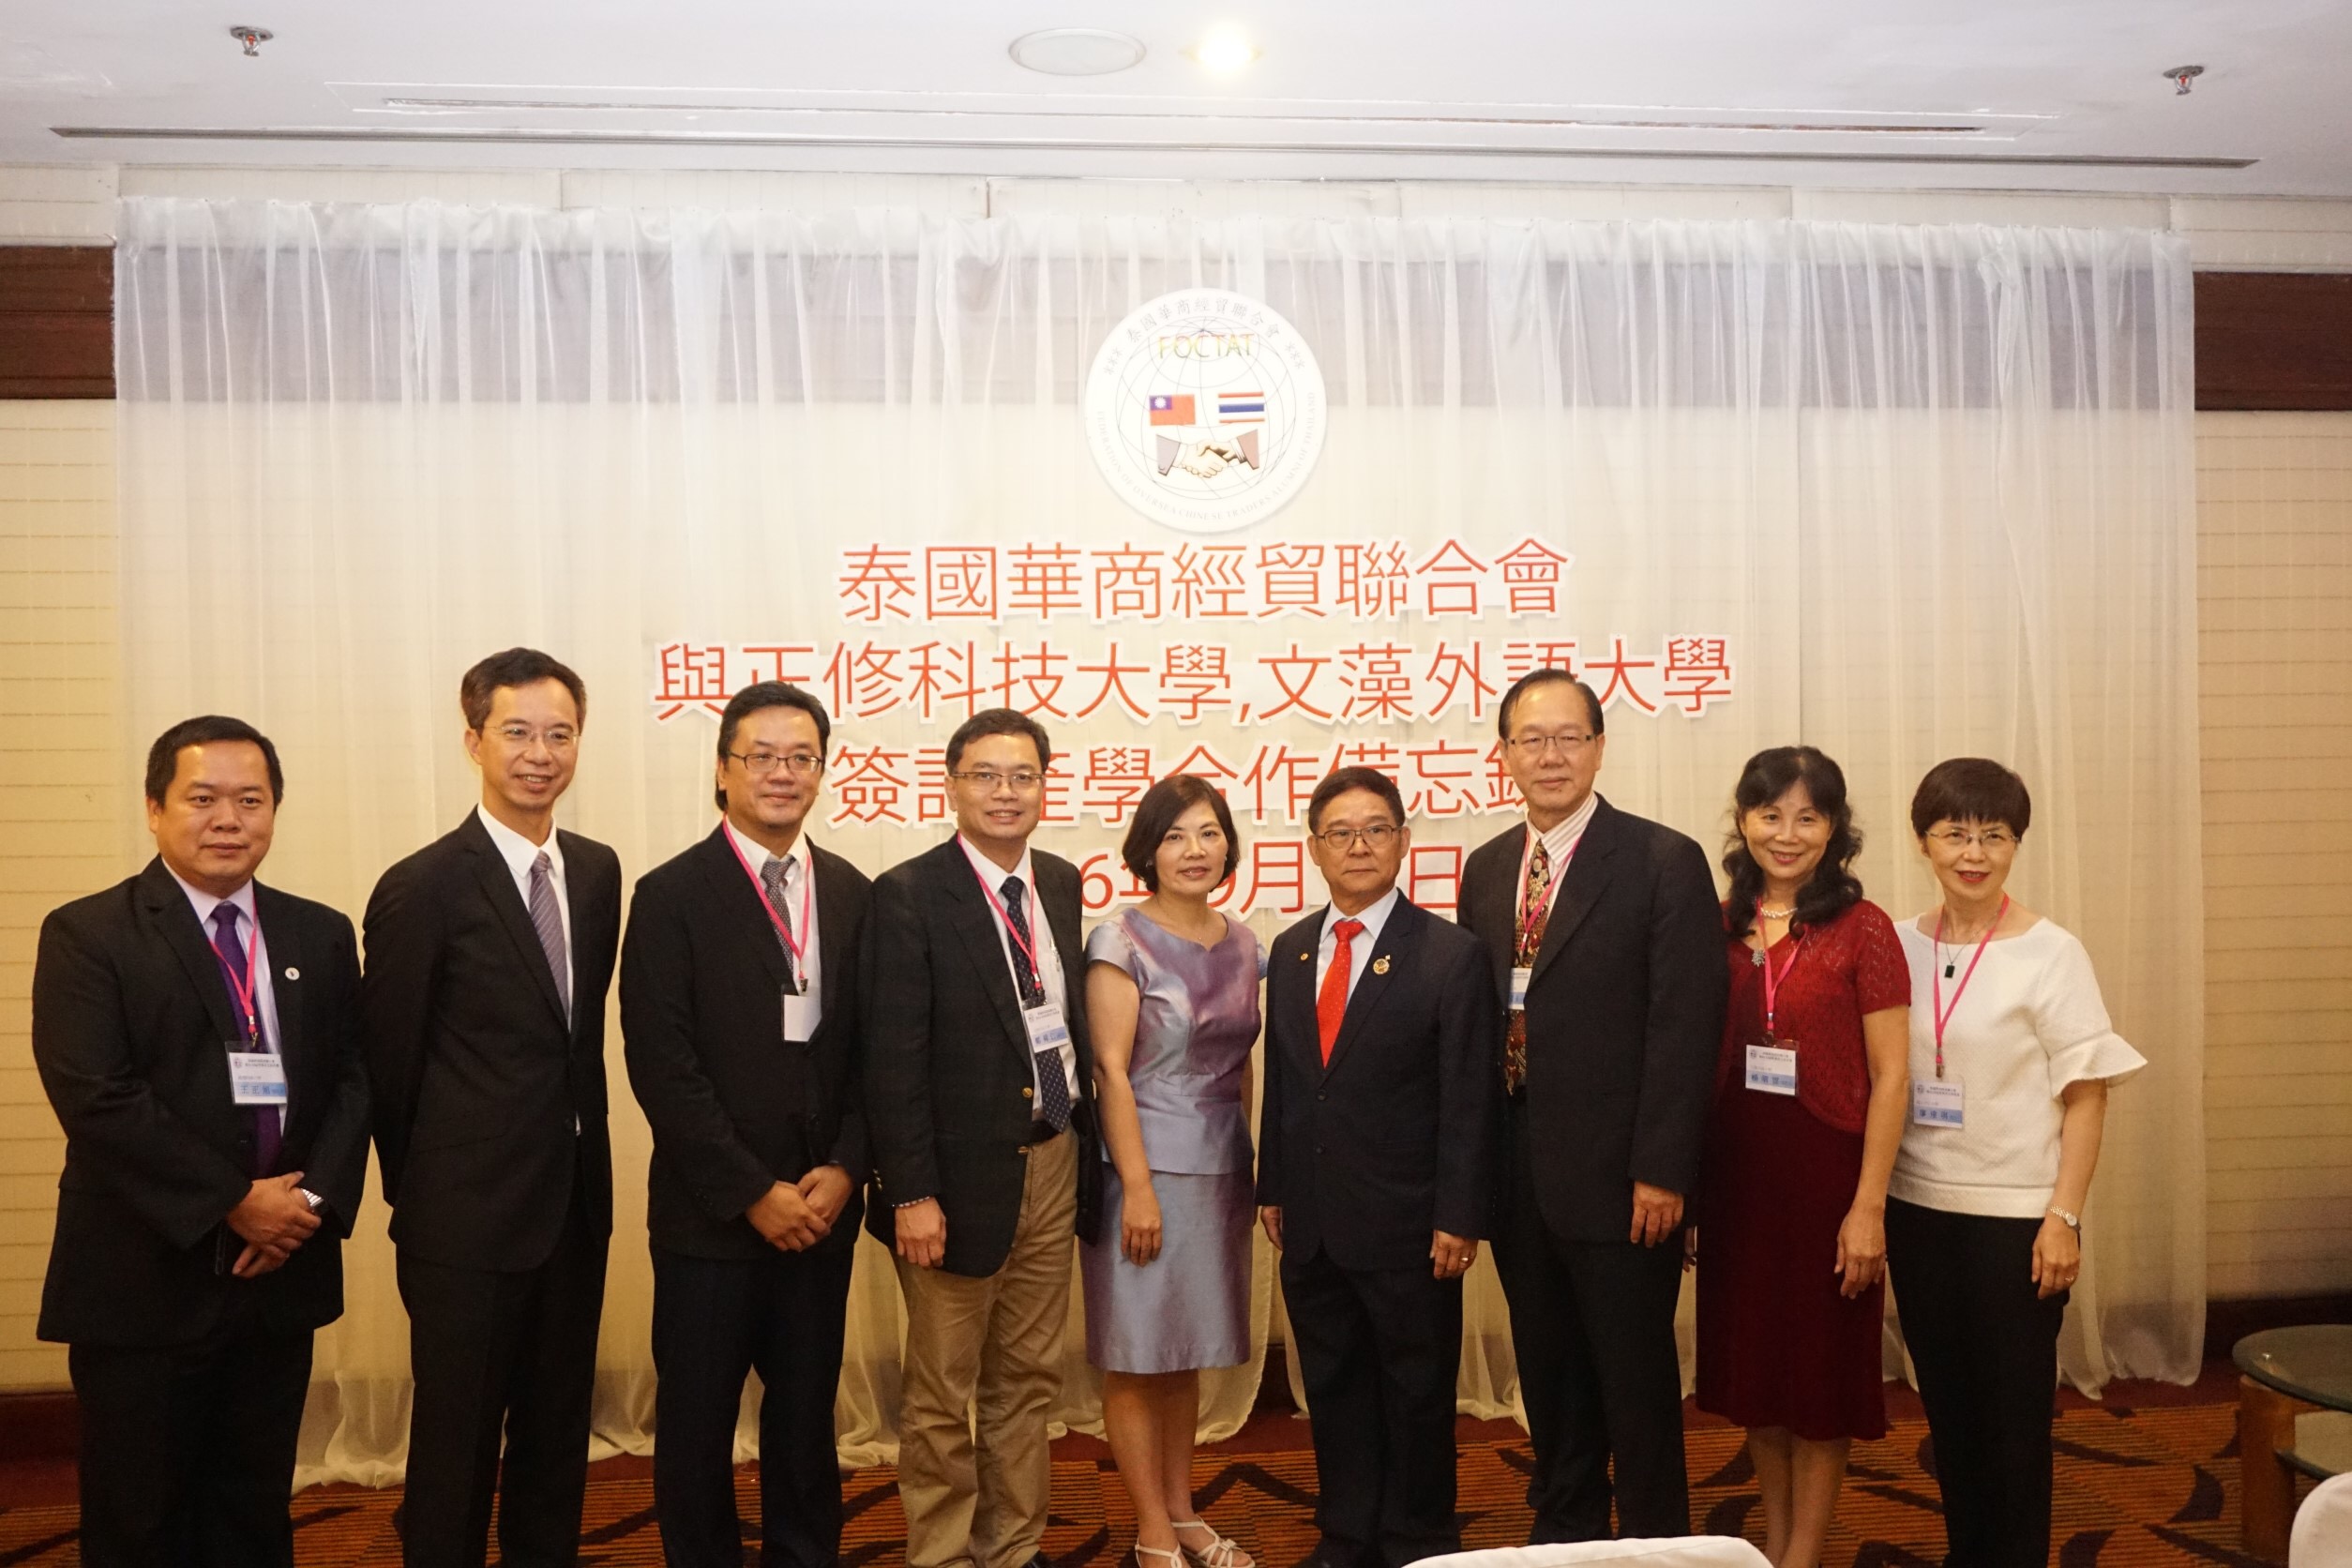 MOUs Aim to Promote Internships in Thailand for Skilled Young Professionals from Taiwan